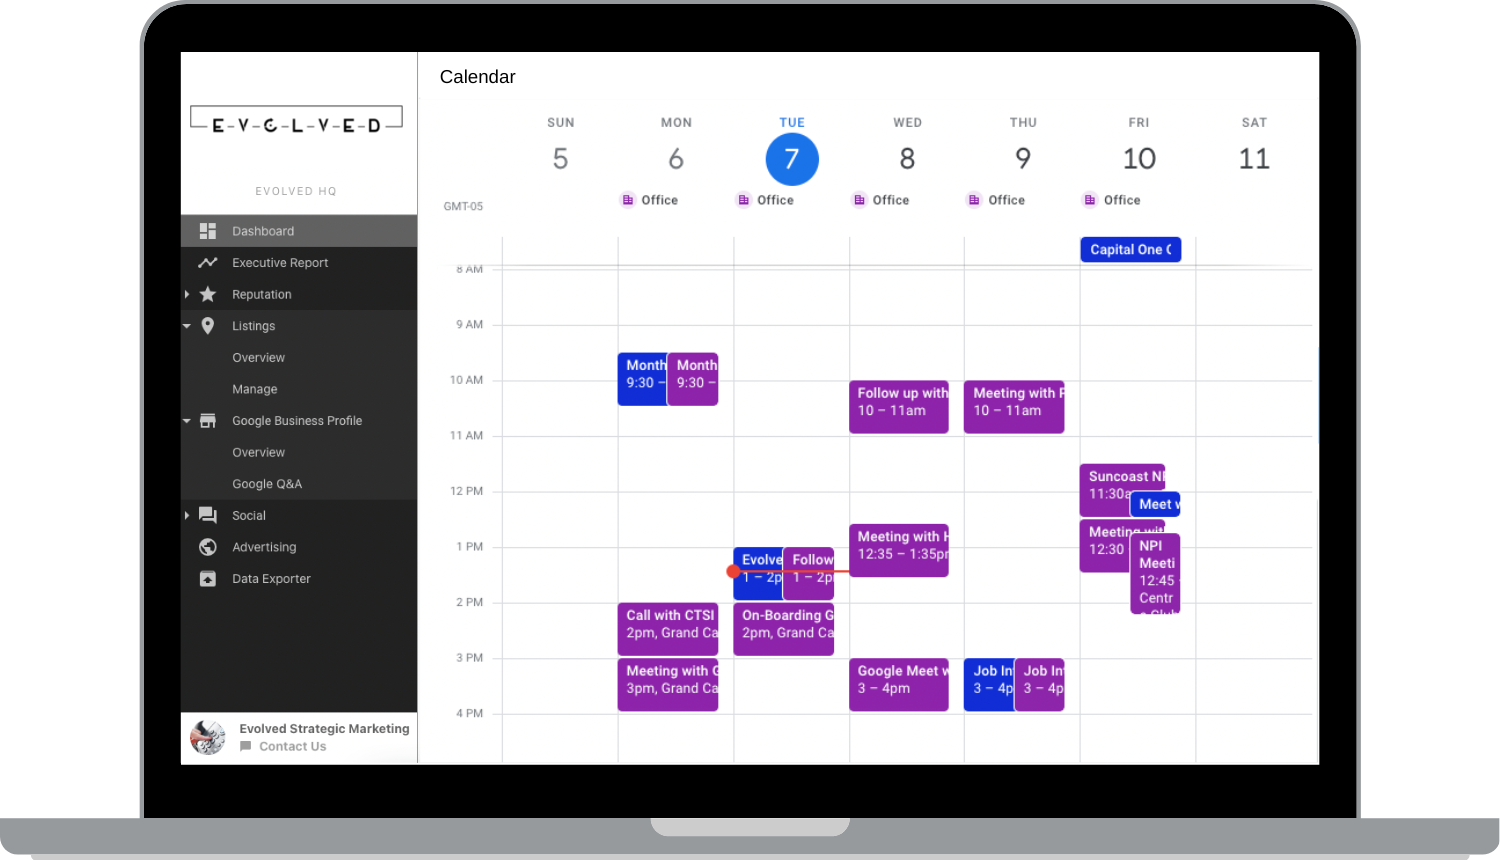 Calendar Integration and Meeting Links for Law Firms